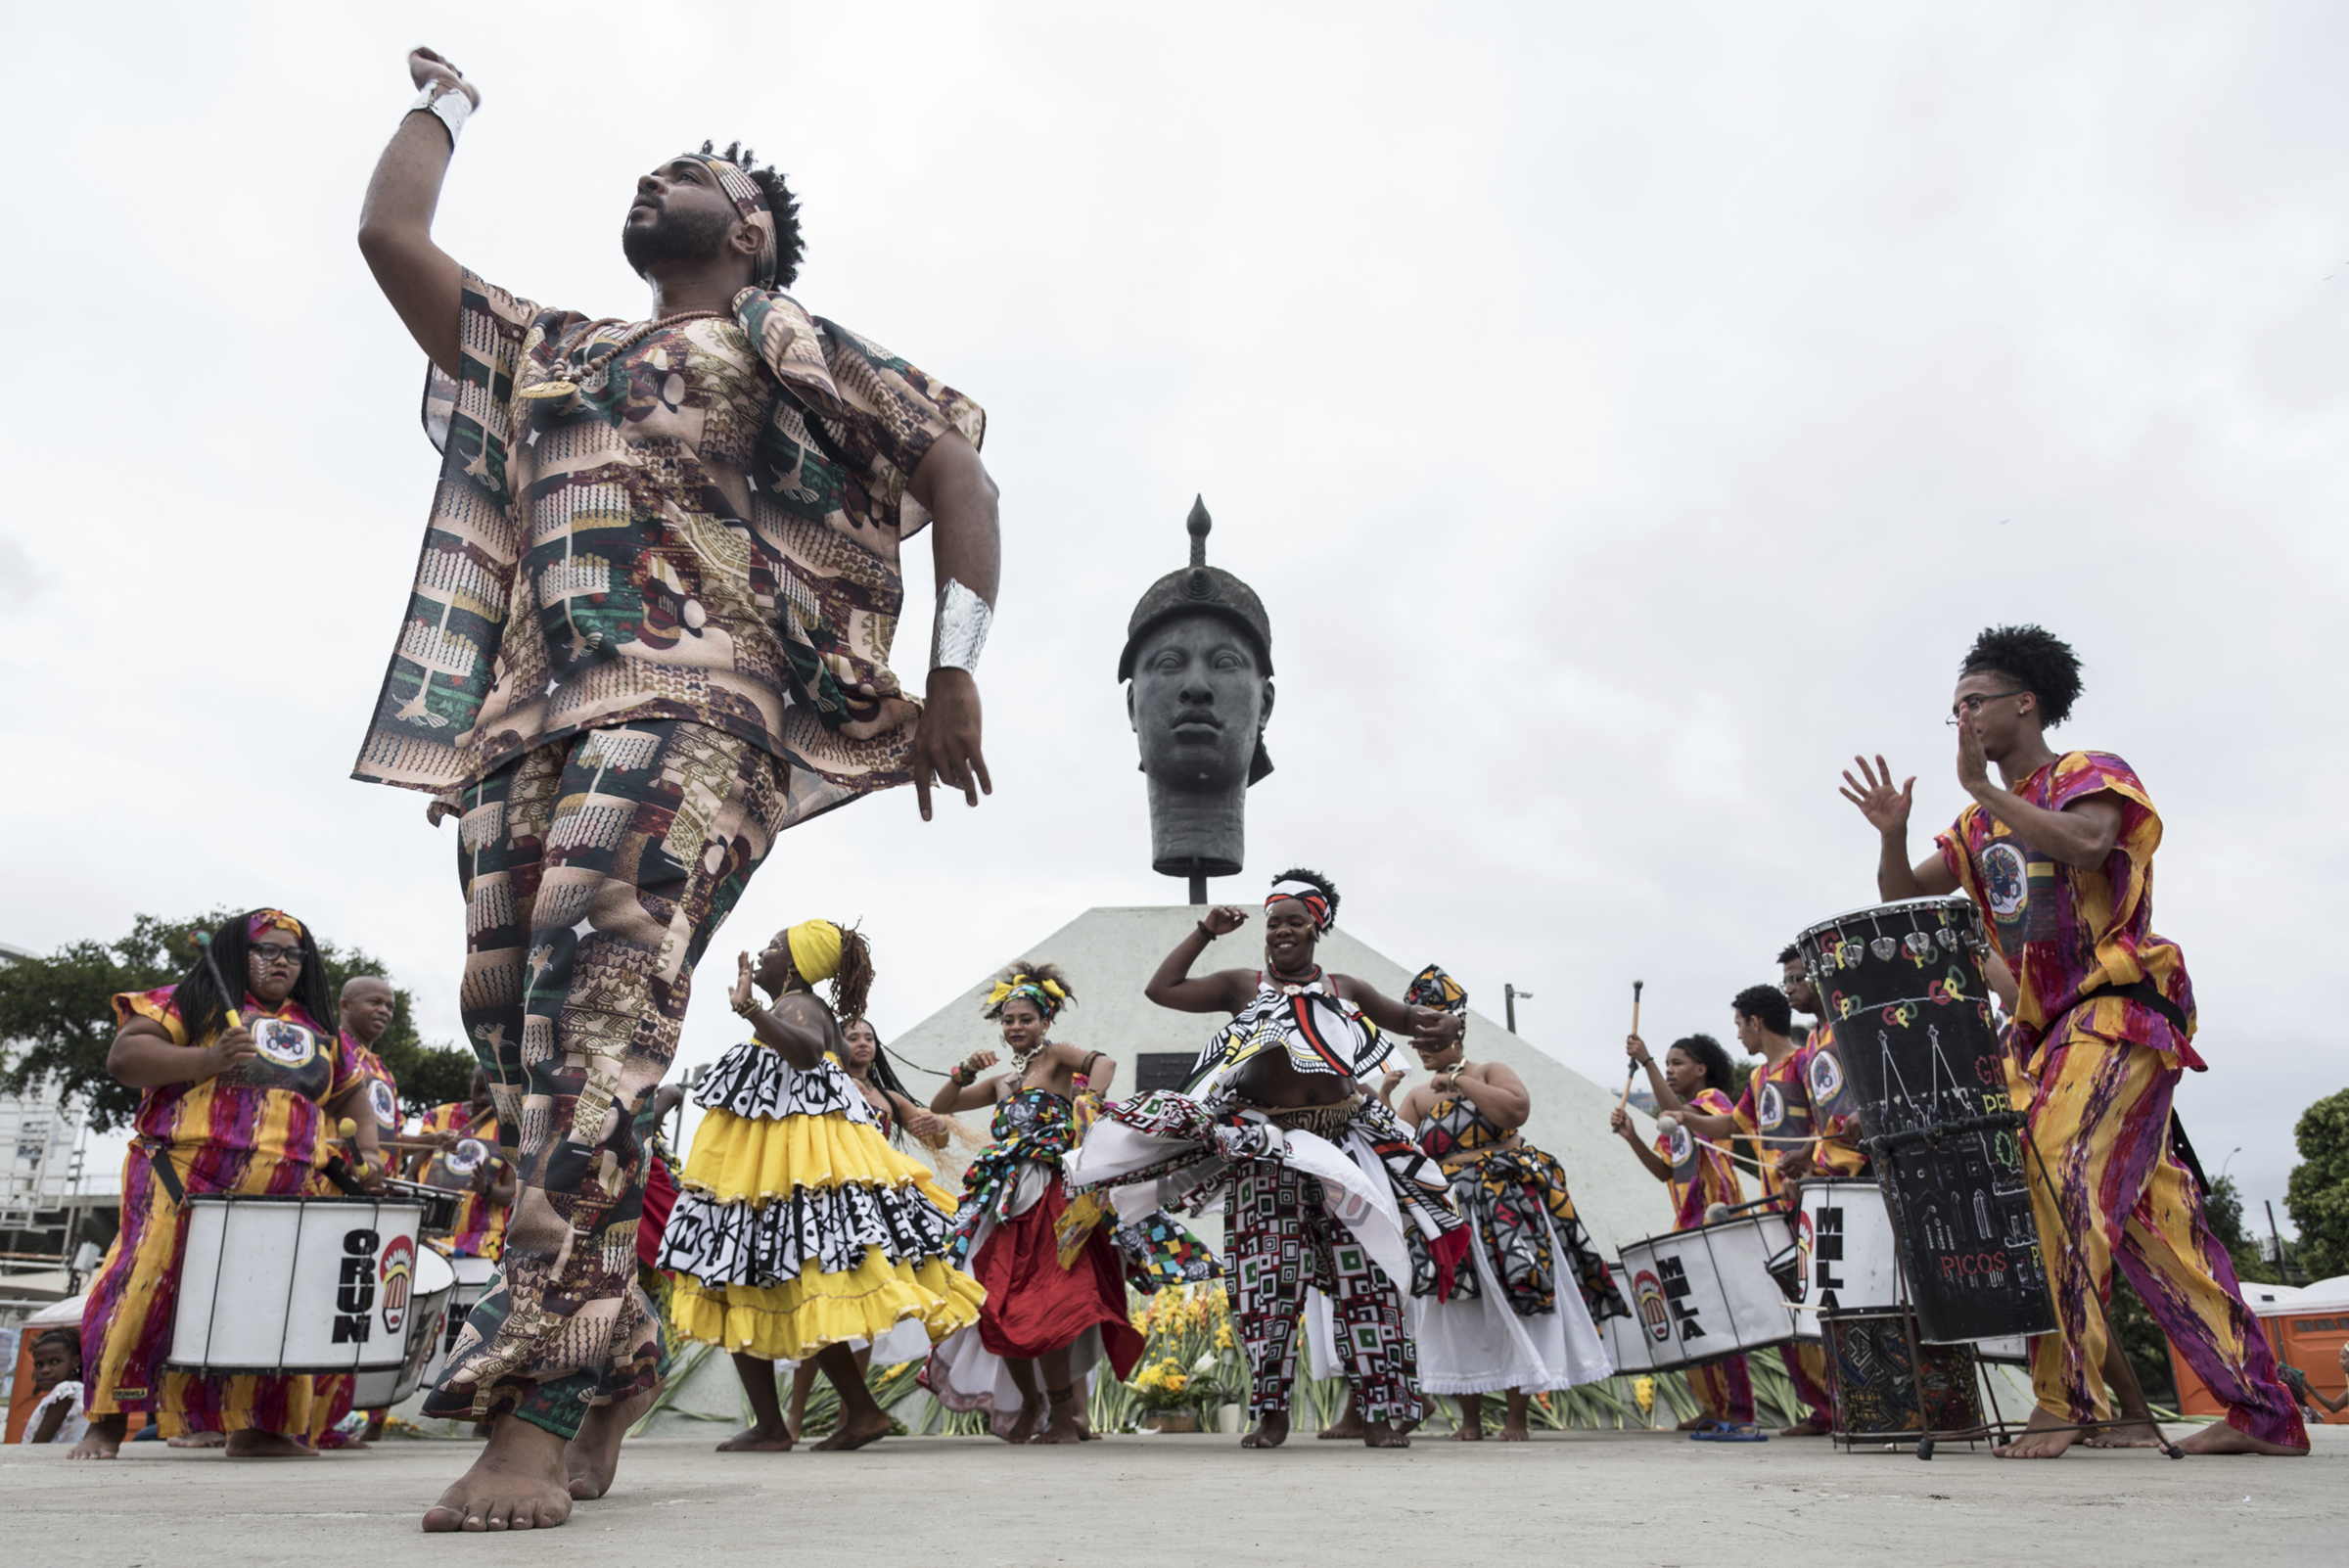 A man dances at a Black Awareness Day event in front of the monument honoring Zumbi dos Palmares, quilombo leader and symbol of the fight against slavery in Brazil, in Rio de Janeiro on Nov. 20, 2019. (Barbara Dias—AGIF/AP)